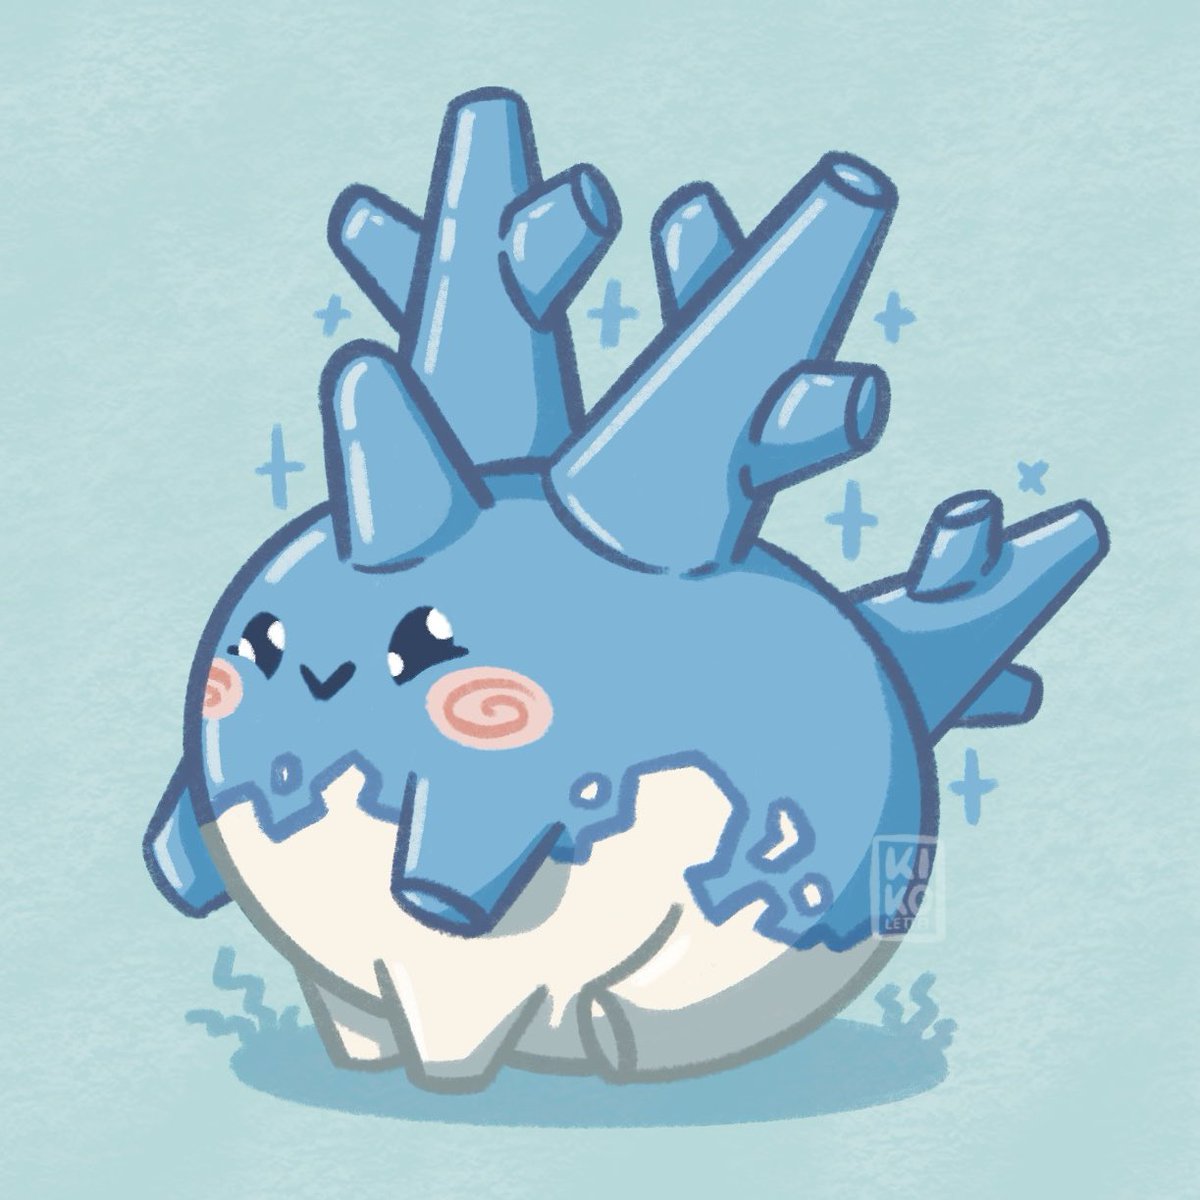 Just sitting here. No thoughts. Just chilling 🥰
#corsola shares his positive vibes with you for the rest of the week! 🤗❤️
.
#corasonn #pokemon #pokemonart #cuteart #shinypokemon #shinyhunting #cutepokemon